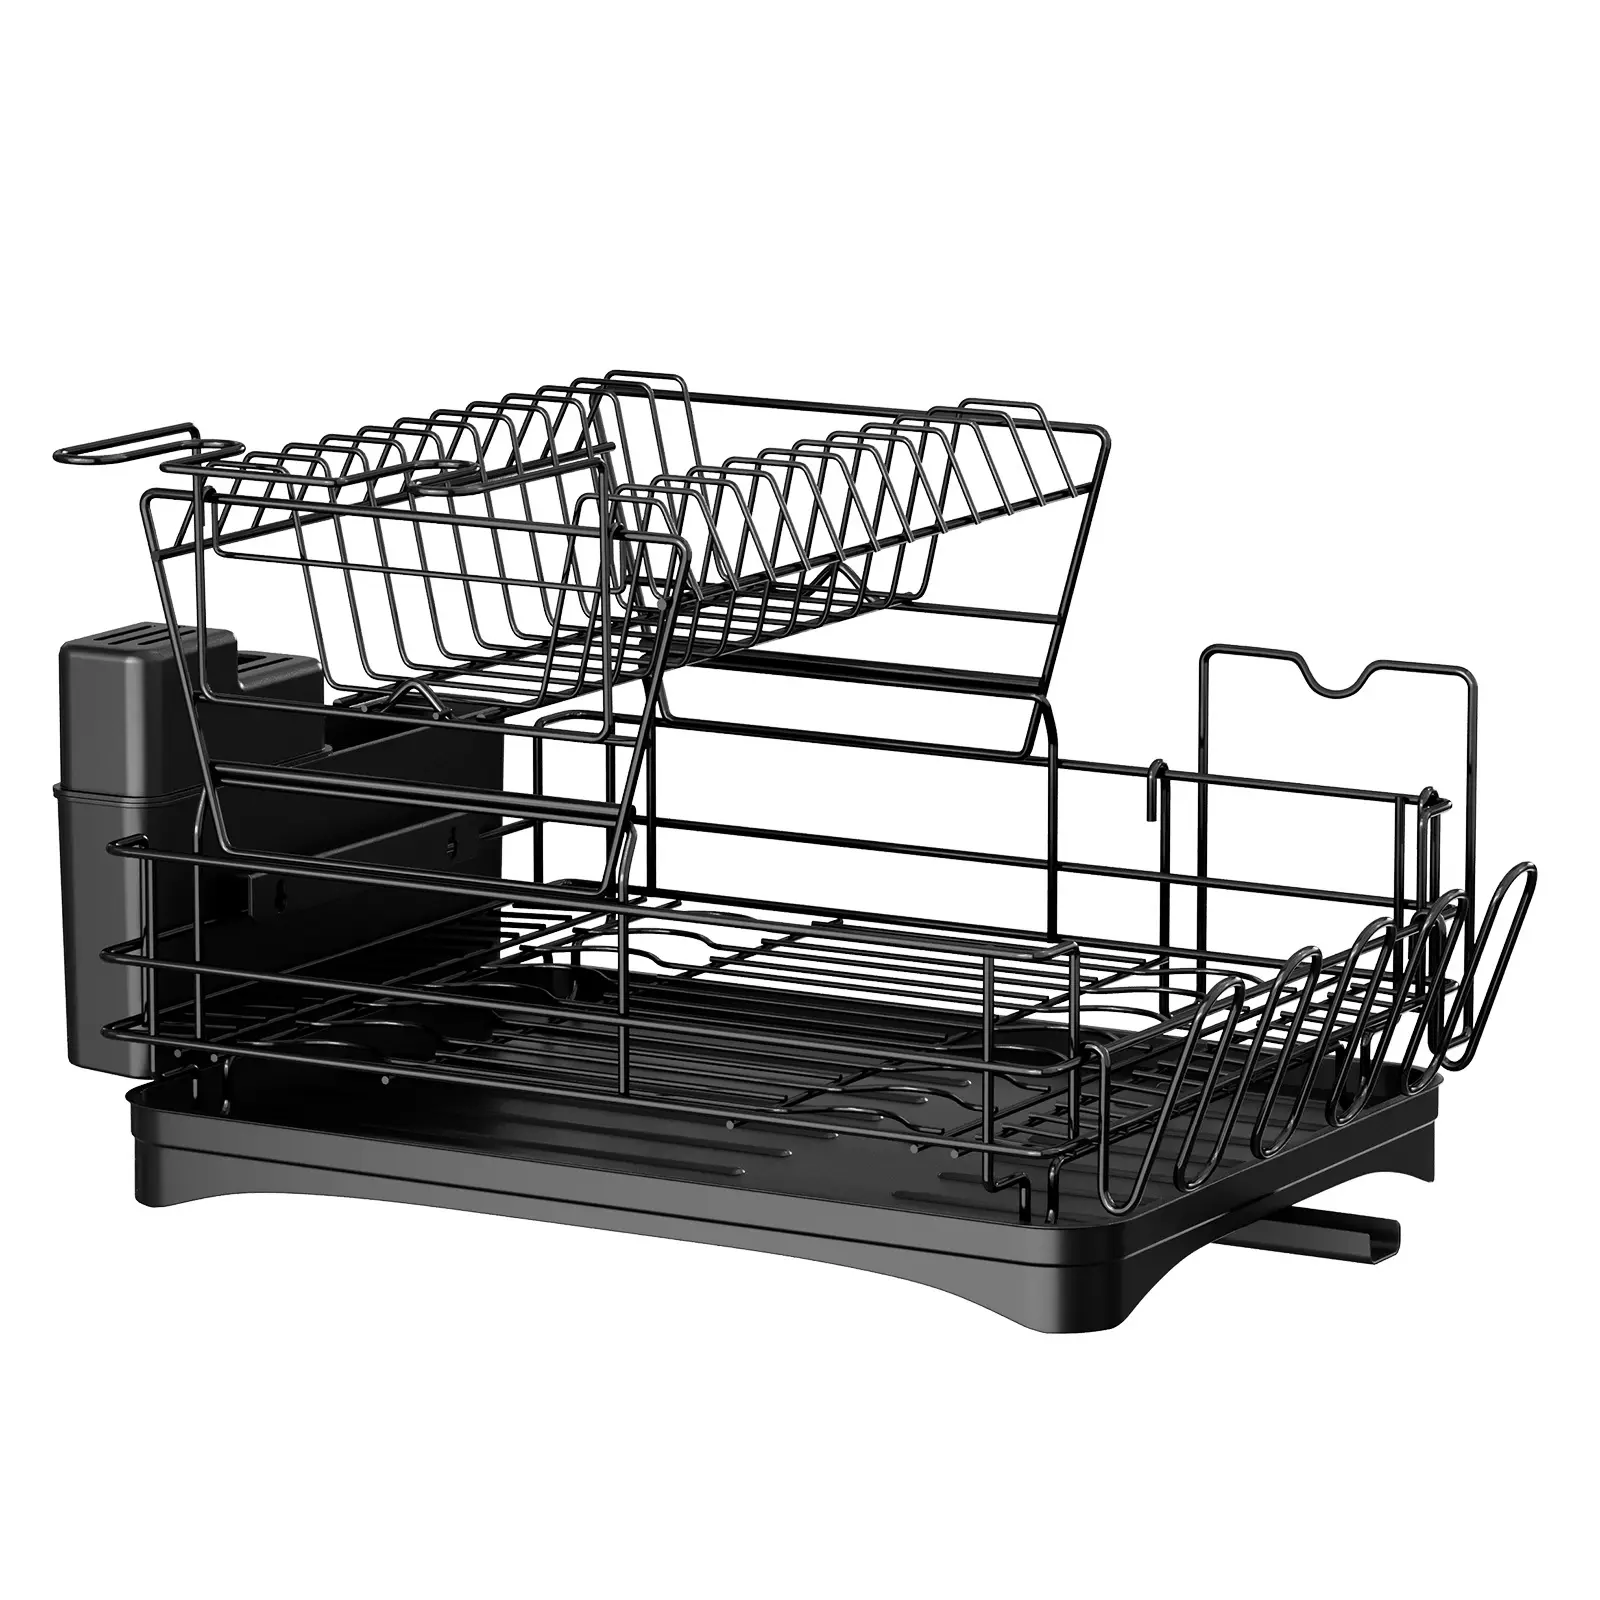 Kitchen Counter Stainless Steel 2 Tier Auto-draining Tray Dish Drainer Black Dish Drying Rack with Drainboard Set